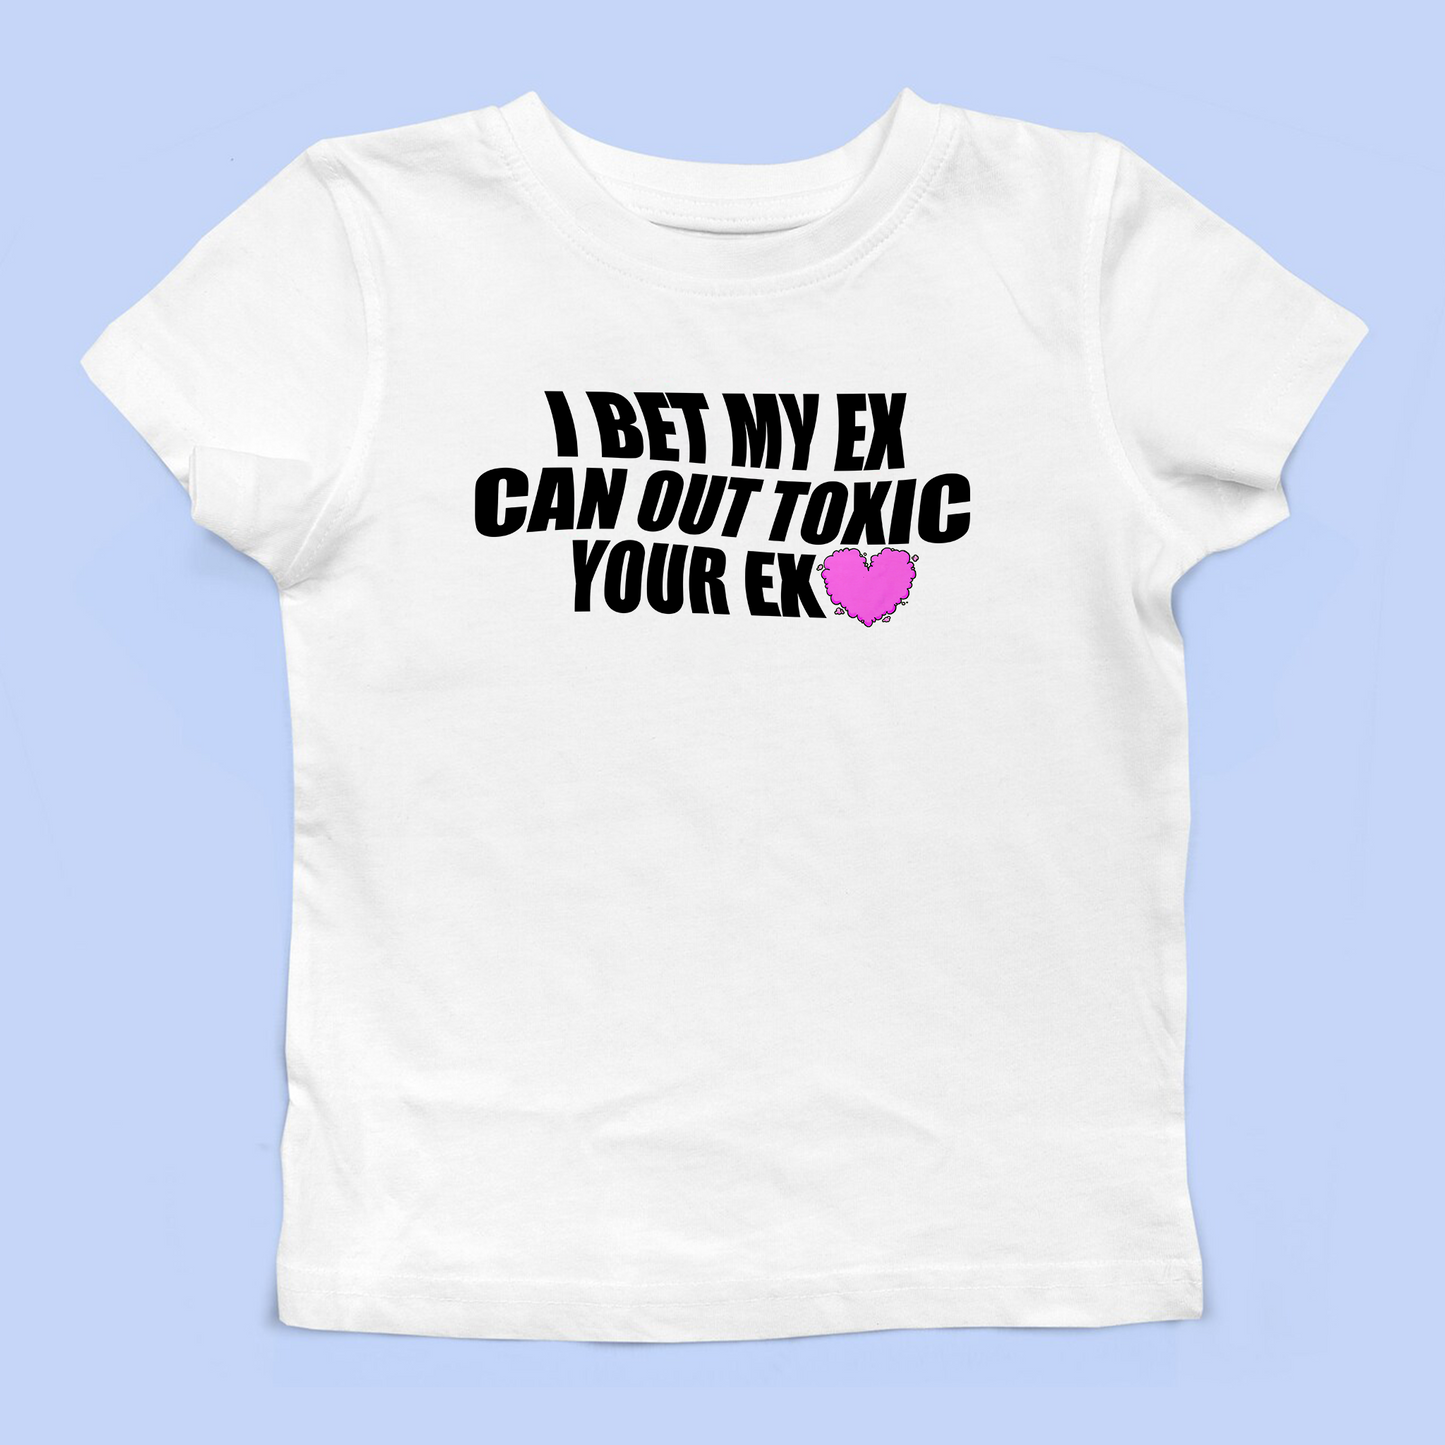 I Bet My Ex Can Out Toxic Your Ex Baby Tee